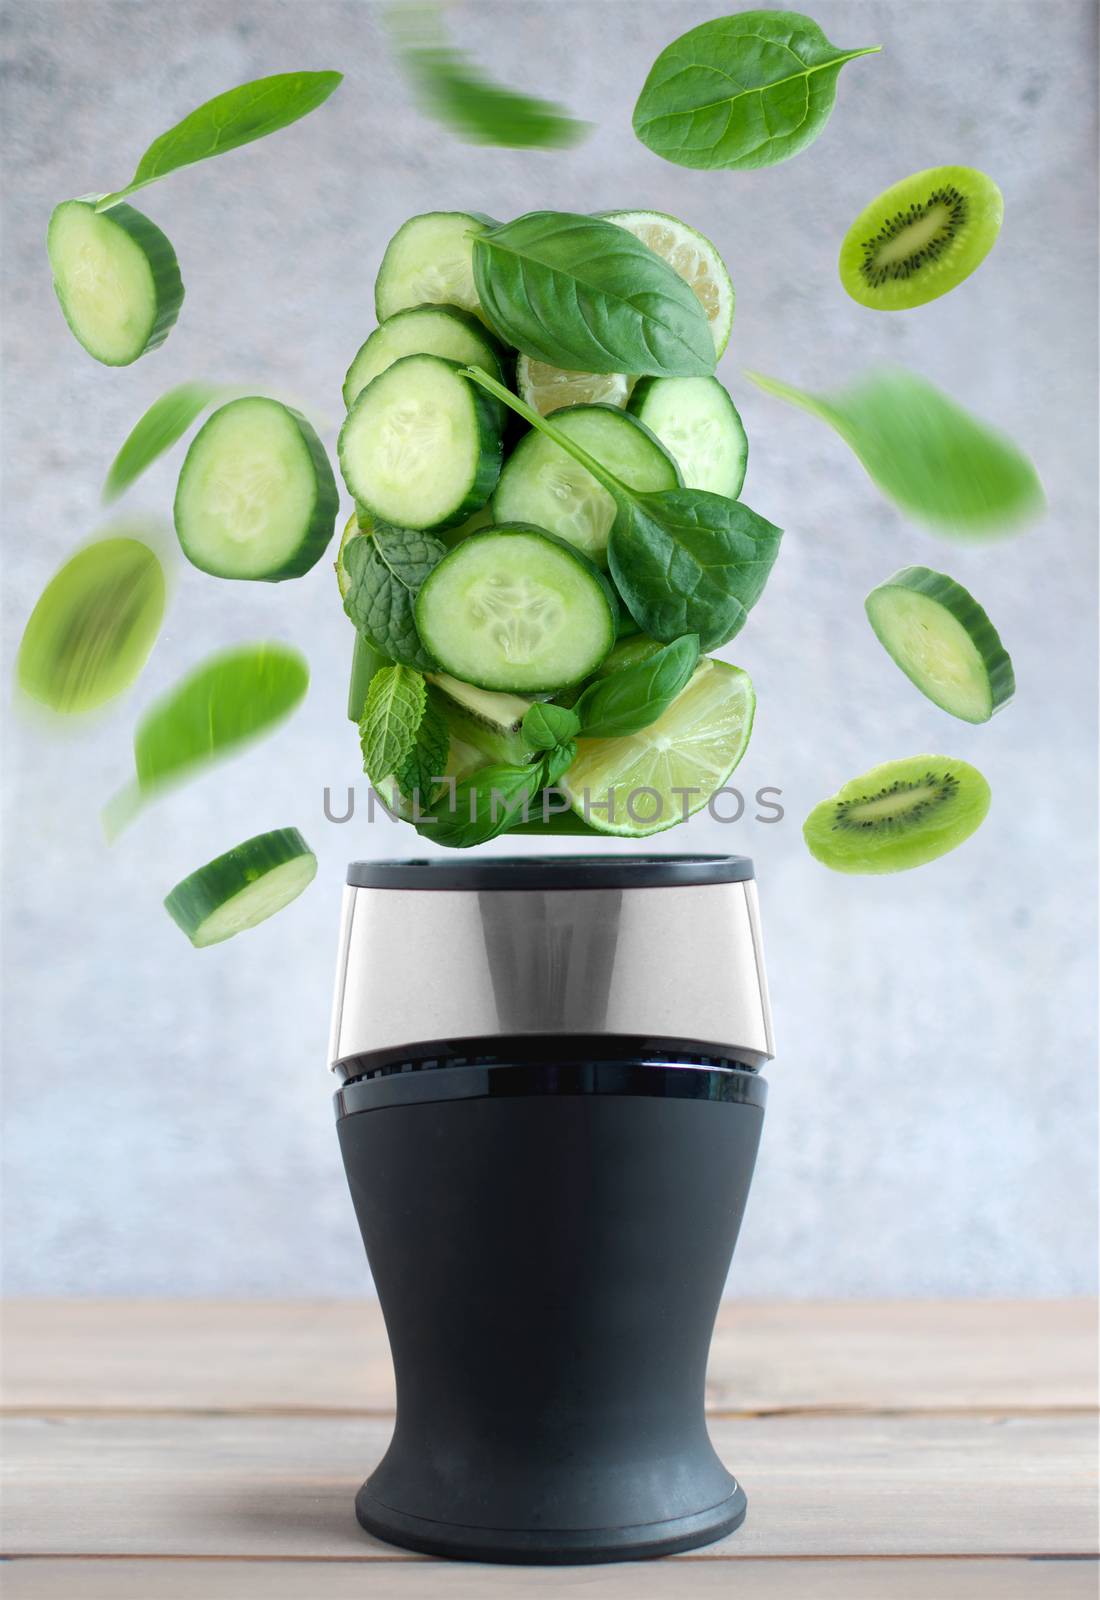 Fresh green fruits and vegetables spinning around a blender cooking concept